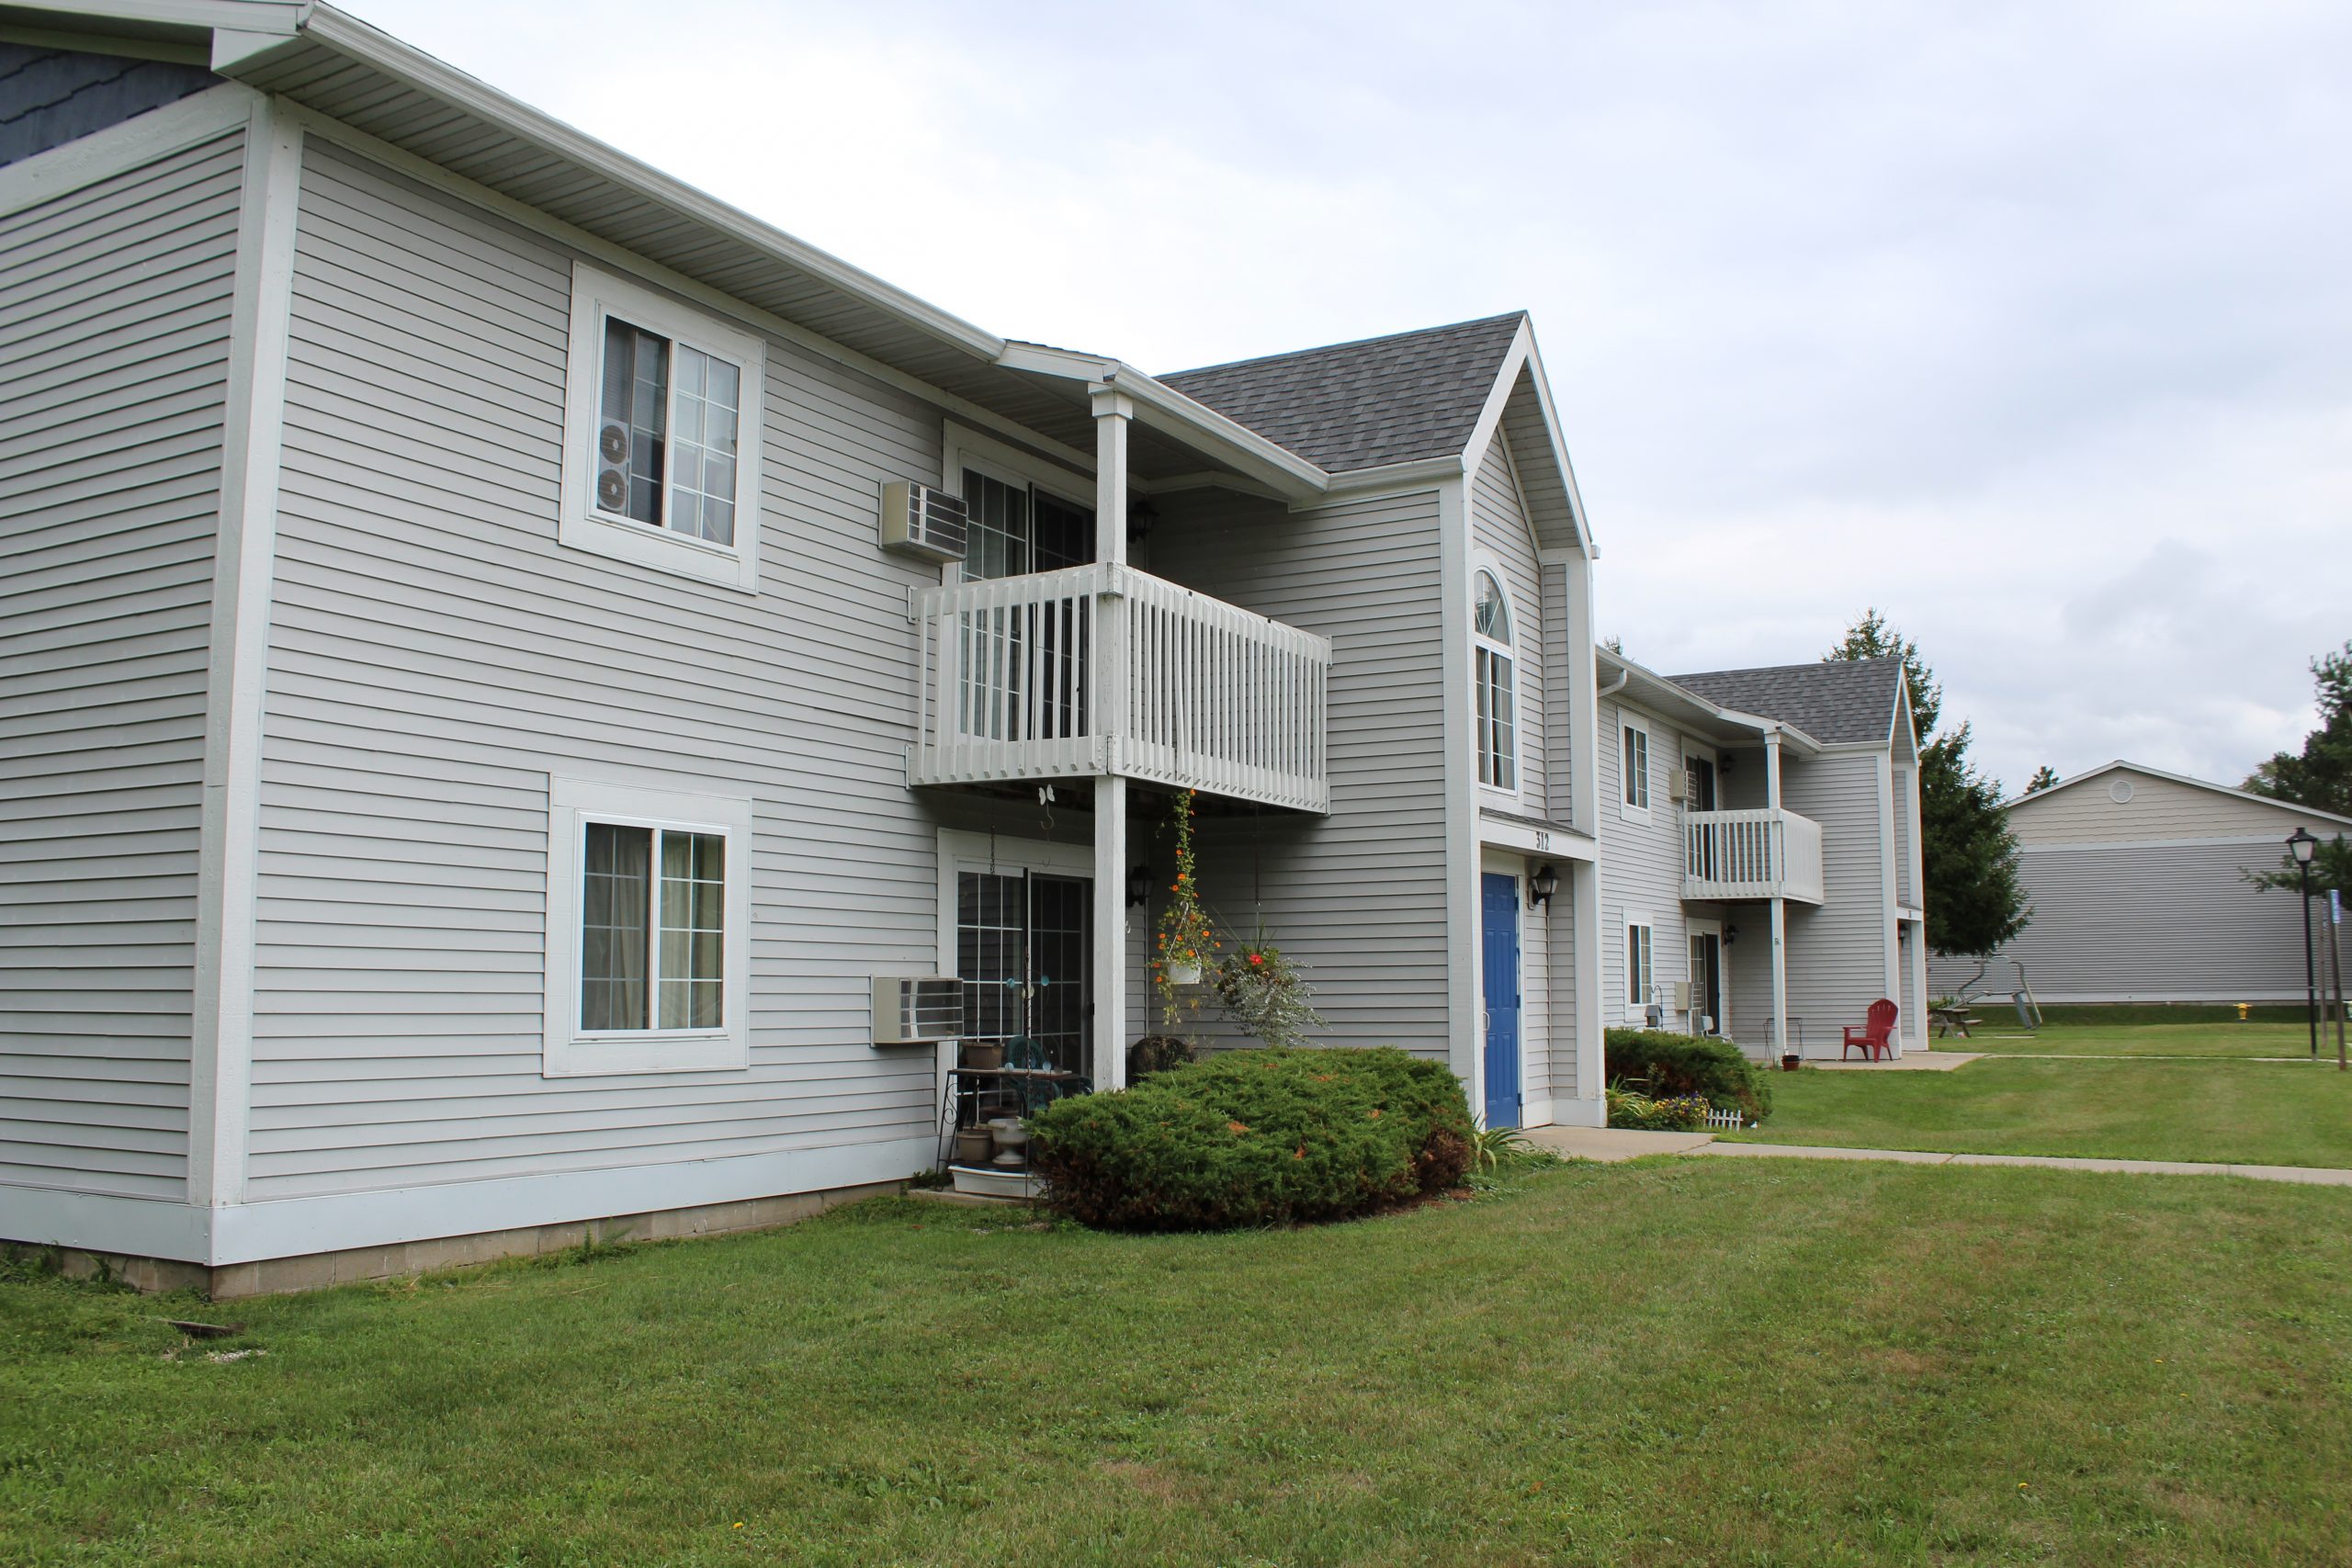 COLONEY JUNCTION APARTMENTS